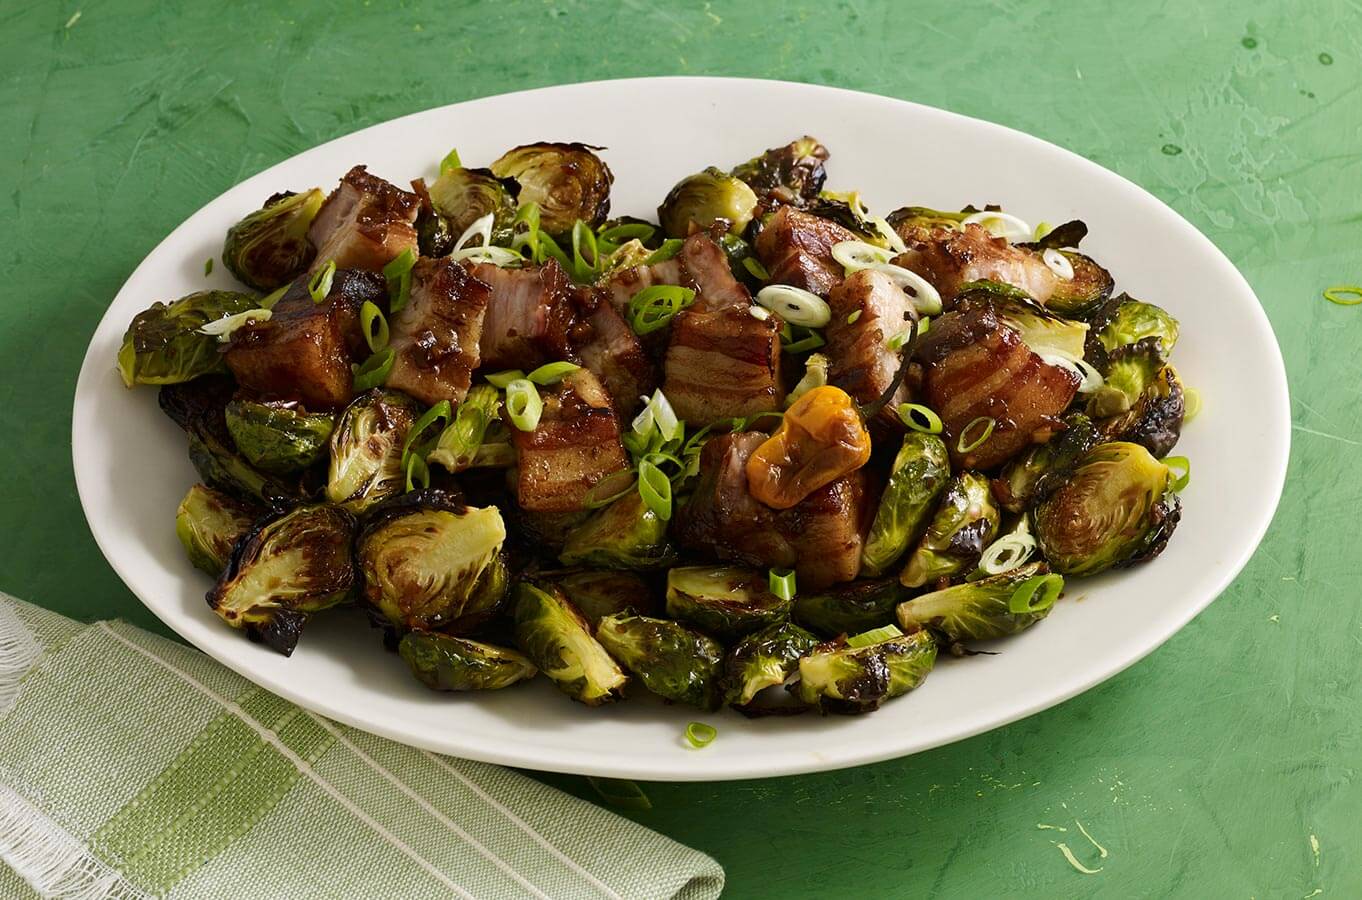 http://patijinich.com/wp-content/uploads/2016/10/Spicy-Brussel-Sprouts-With-Pork-Belly-And-Habaneros.jpg